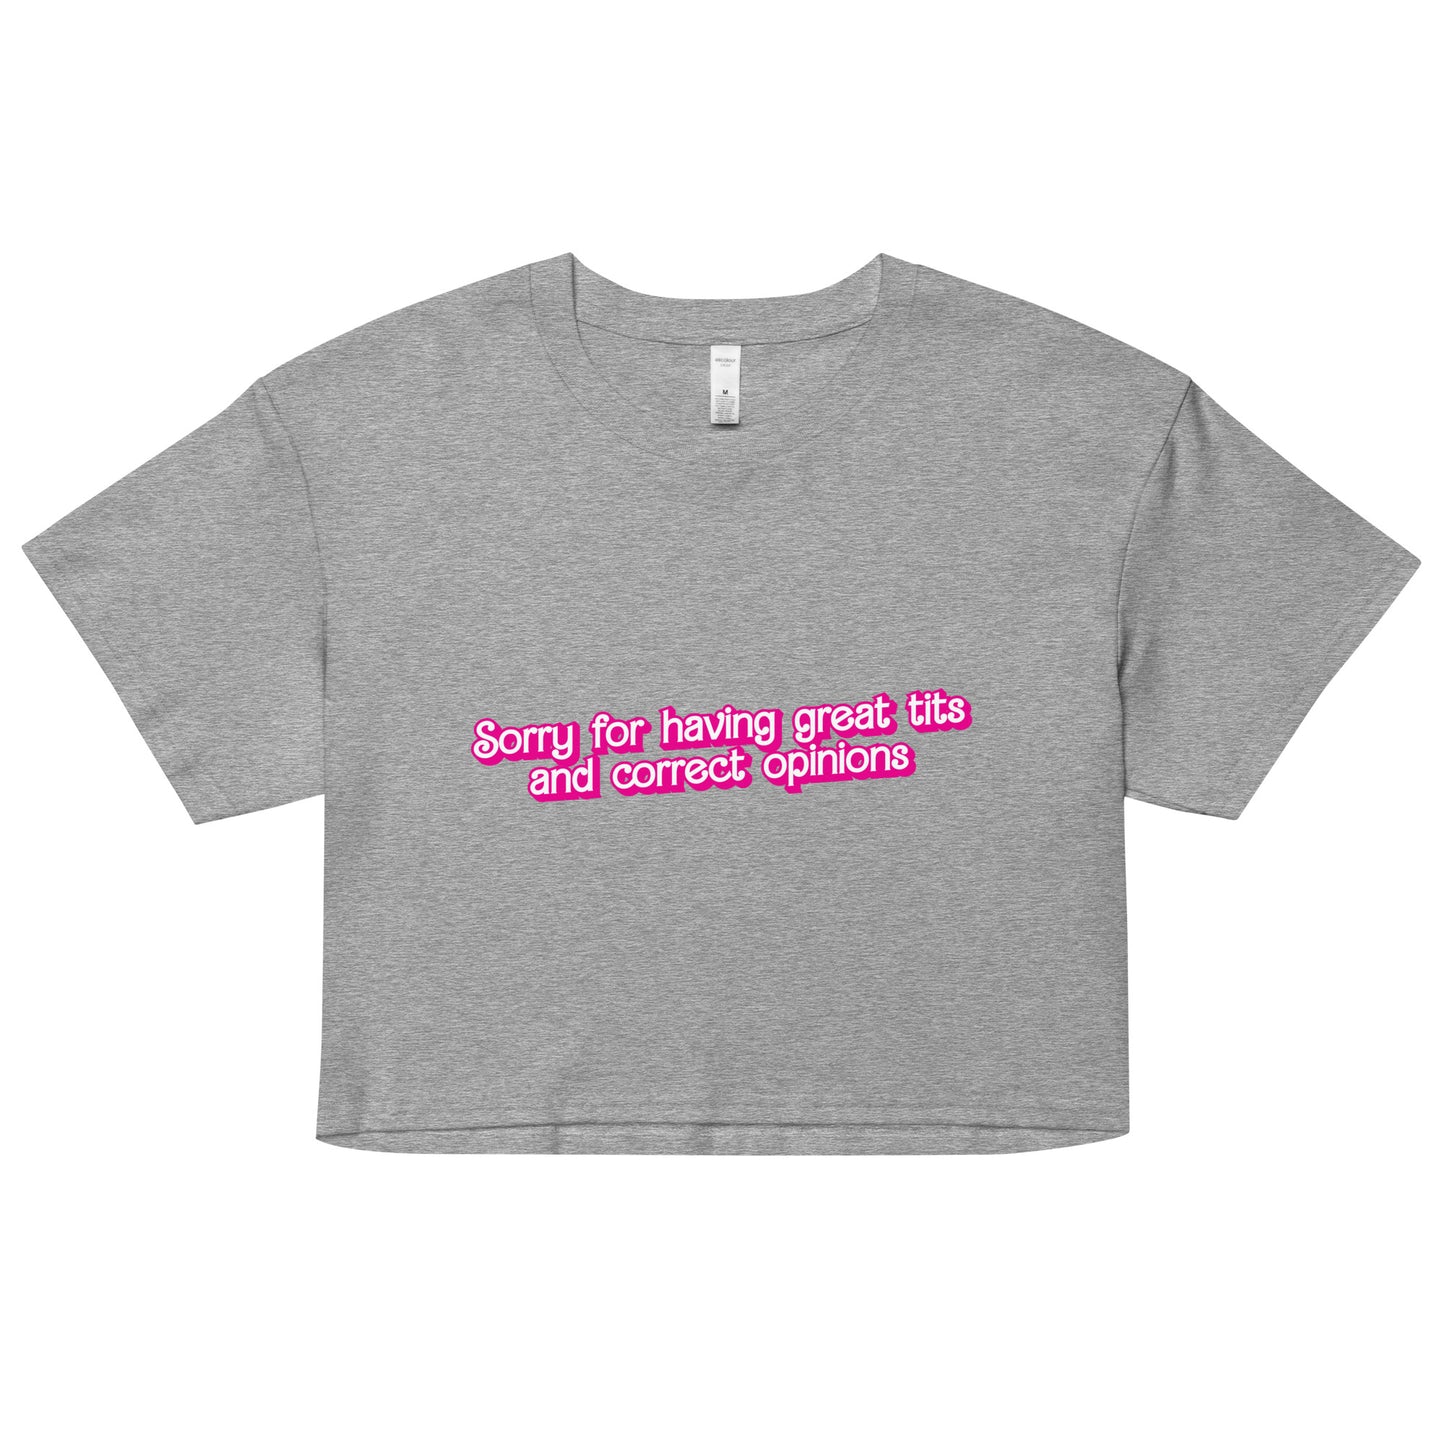 Great Tits and Correct Opinions (Pink Font) crop top